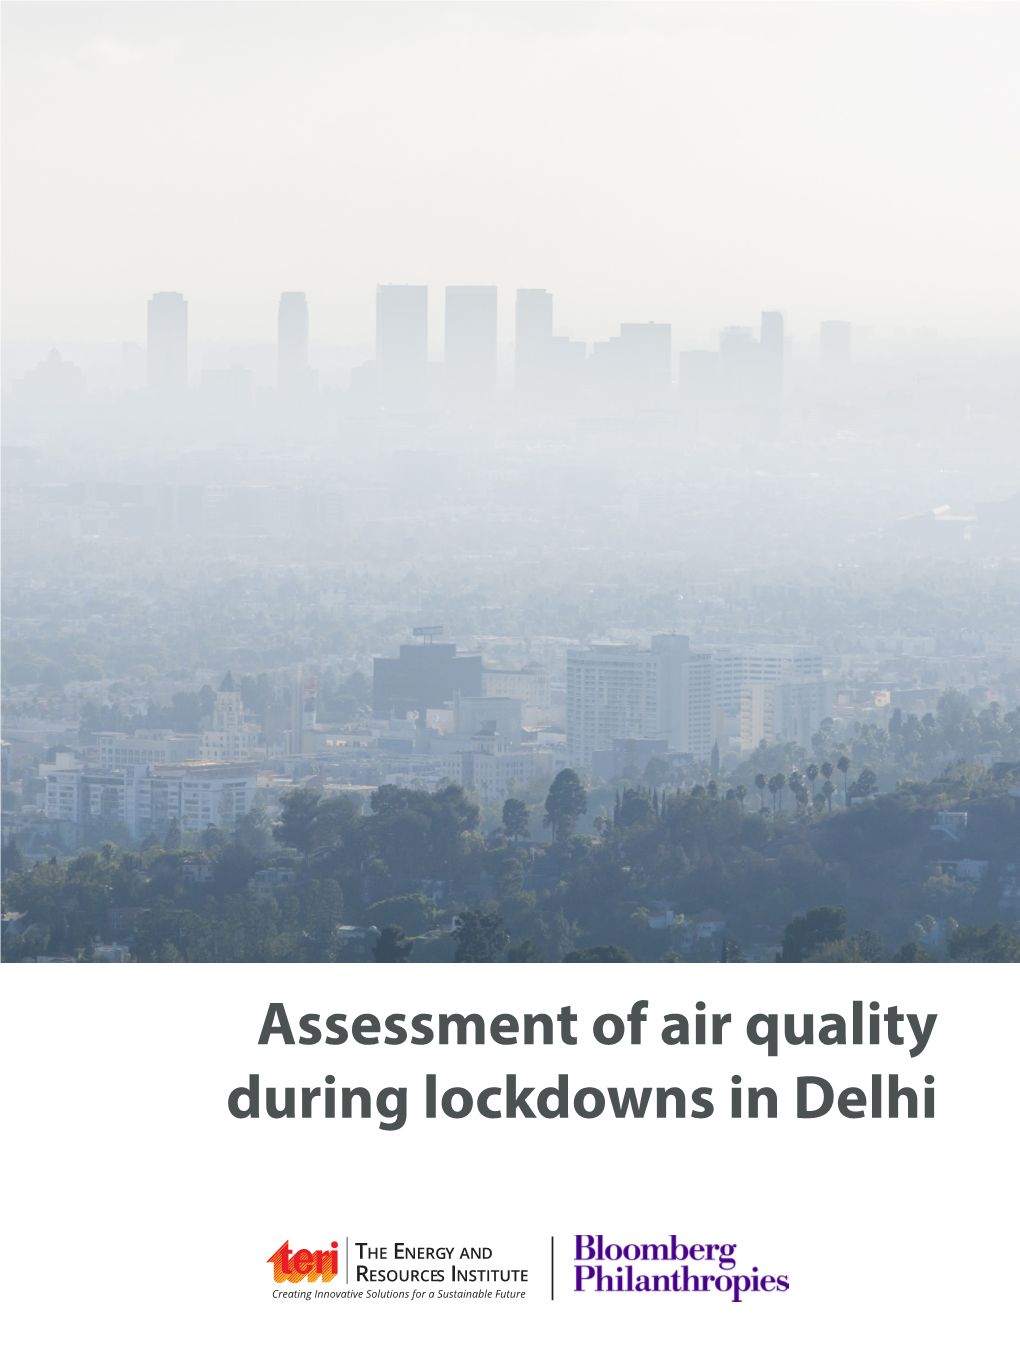 Assessment of Air Quality During Lockdowns in Delhi